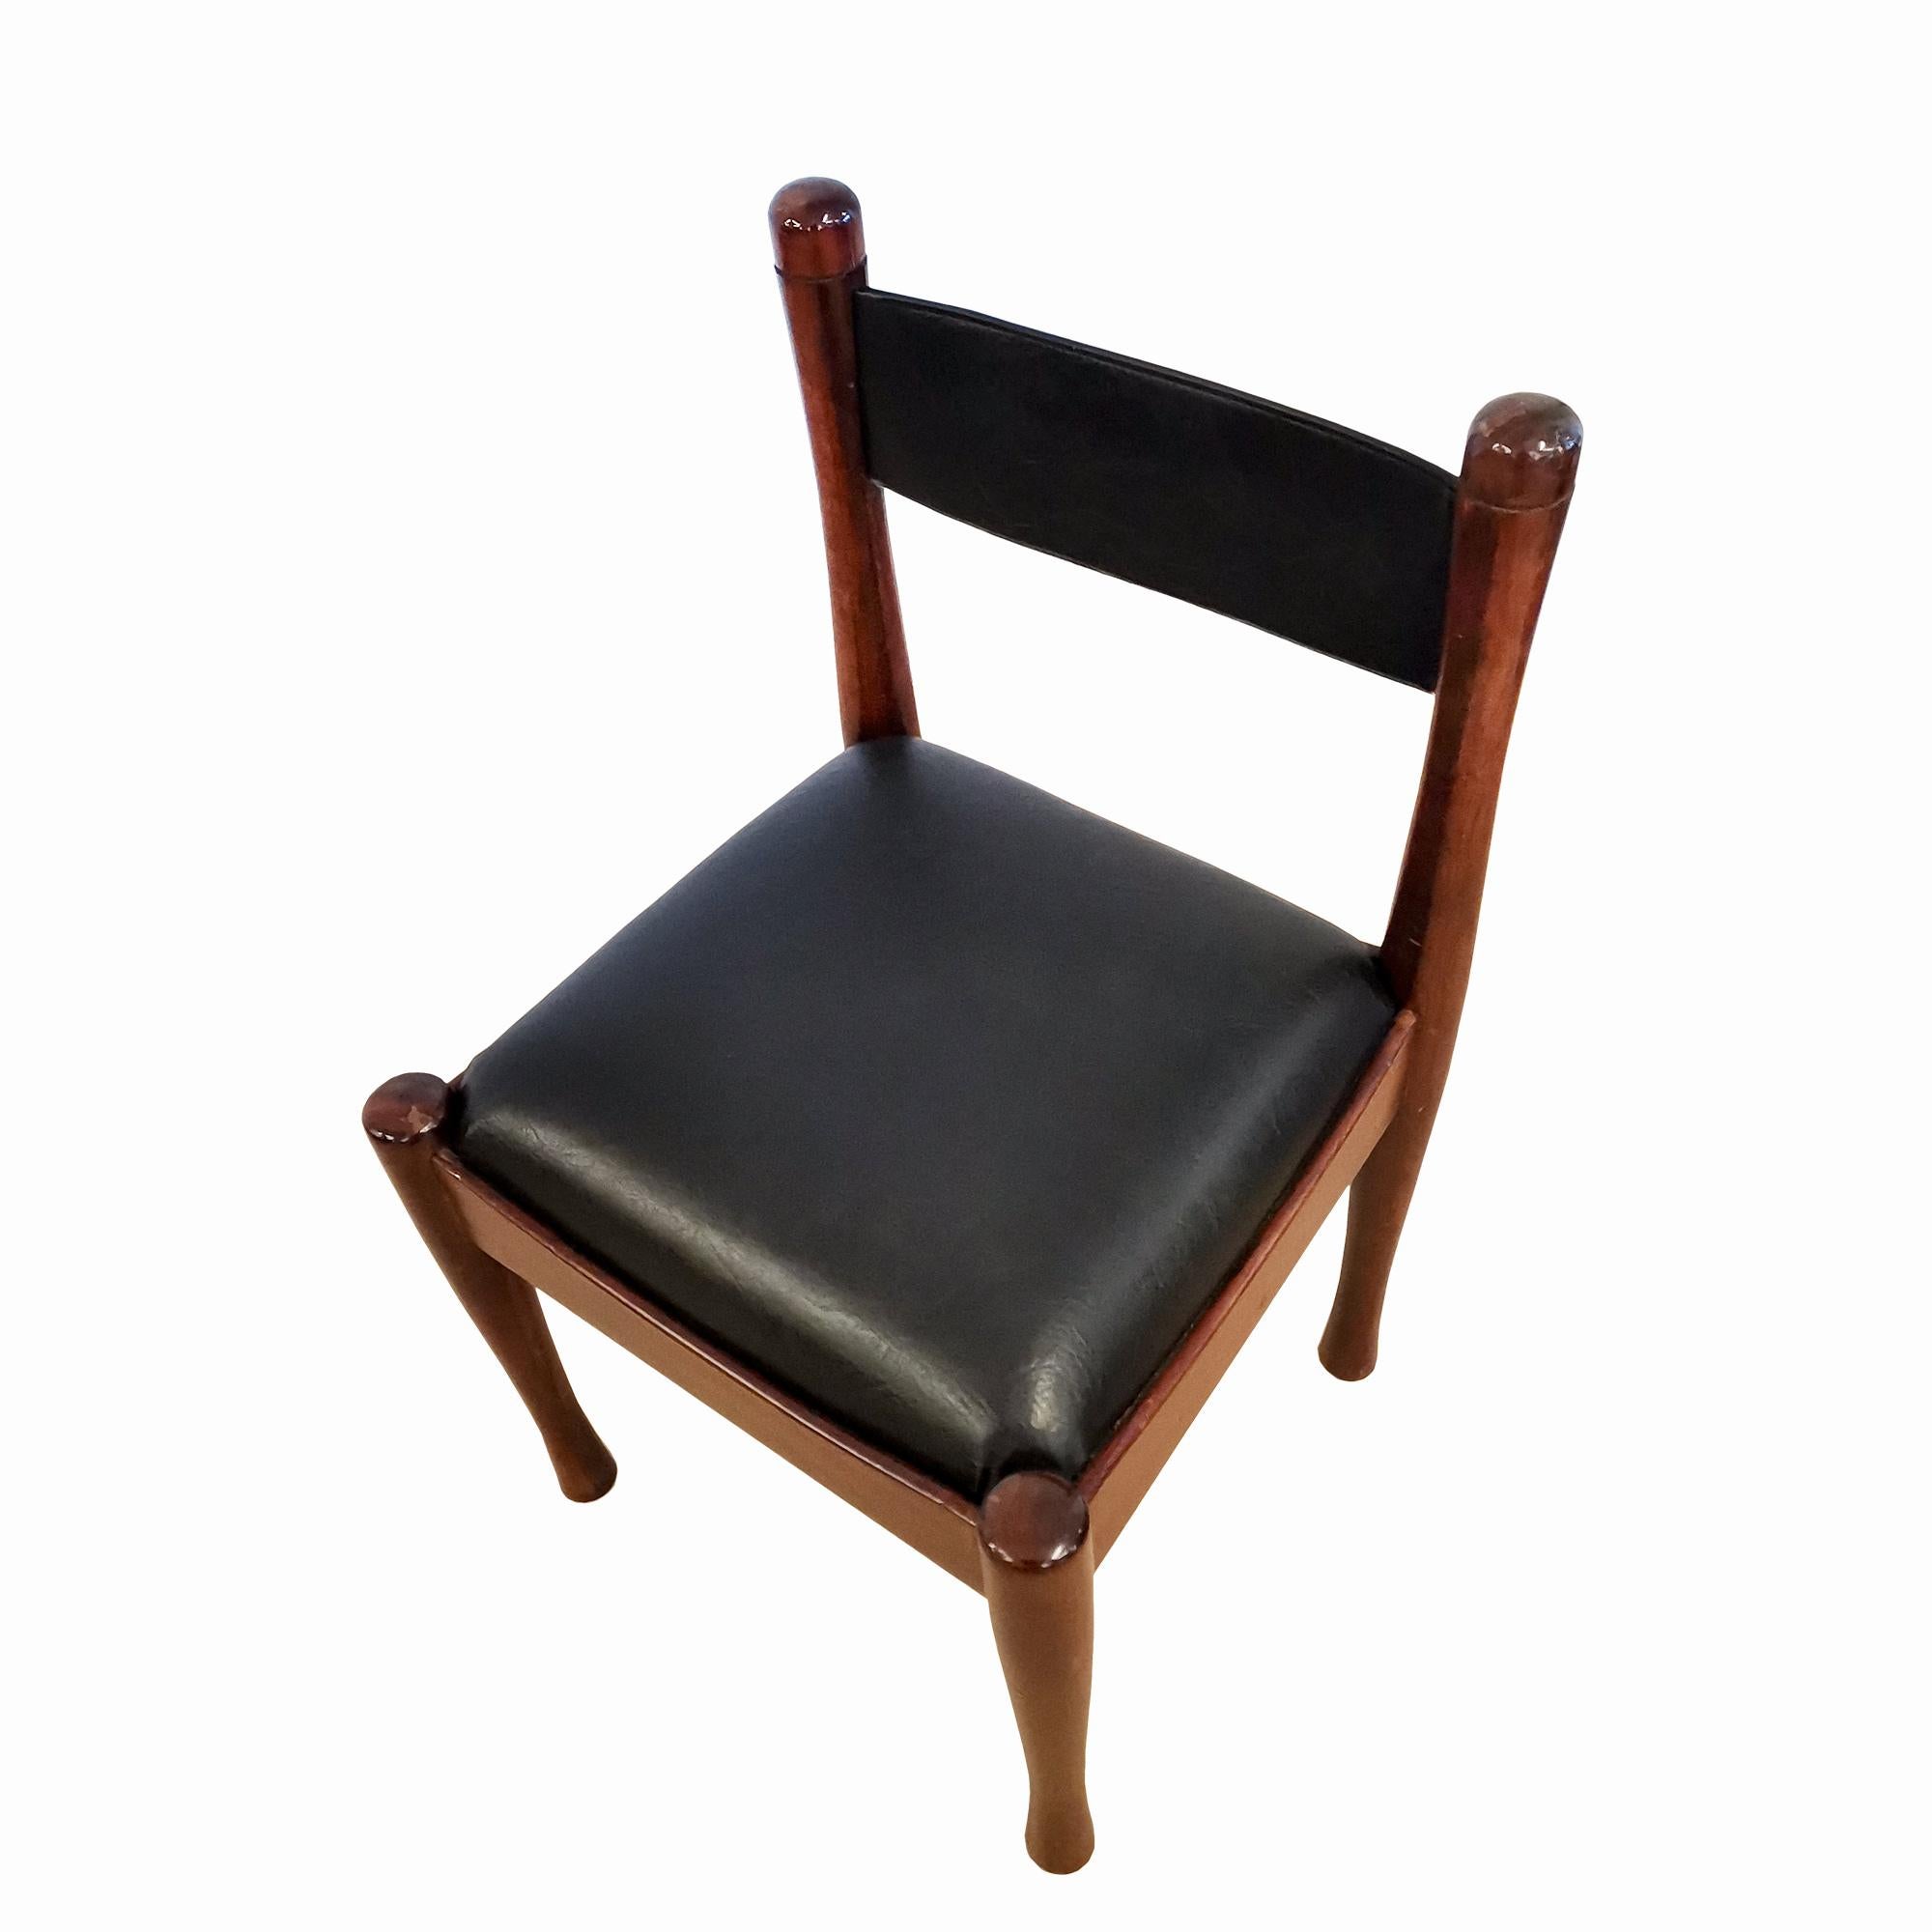 Set of Mid-Century Modern Chairs in Mahogany by Silvio Coppola - Italy, 1970 For Sale 1